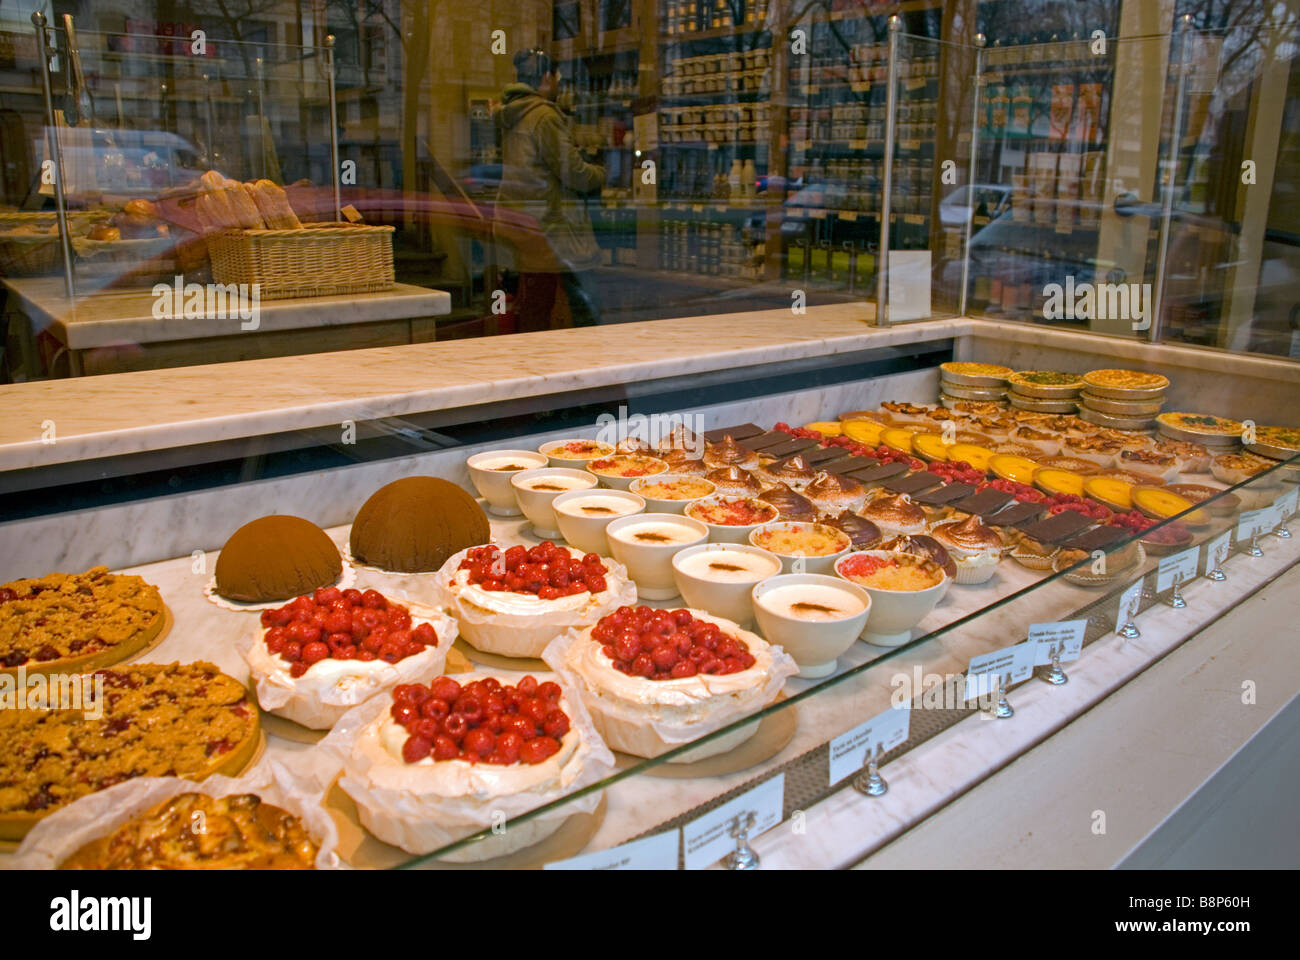 Brussels Belgium Cakes and pastries in the window of a delicatessen shop in the capital Stock Photo